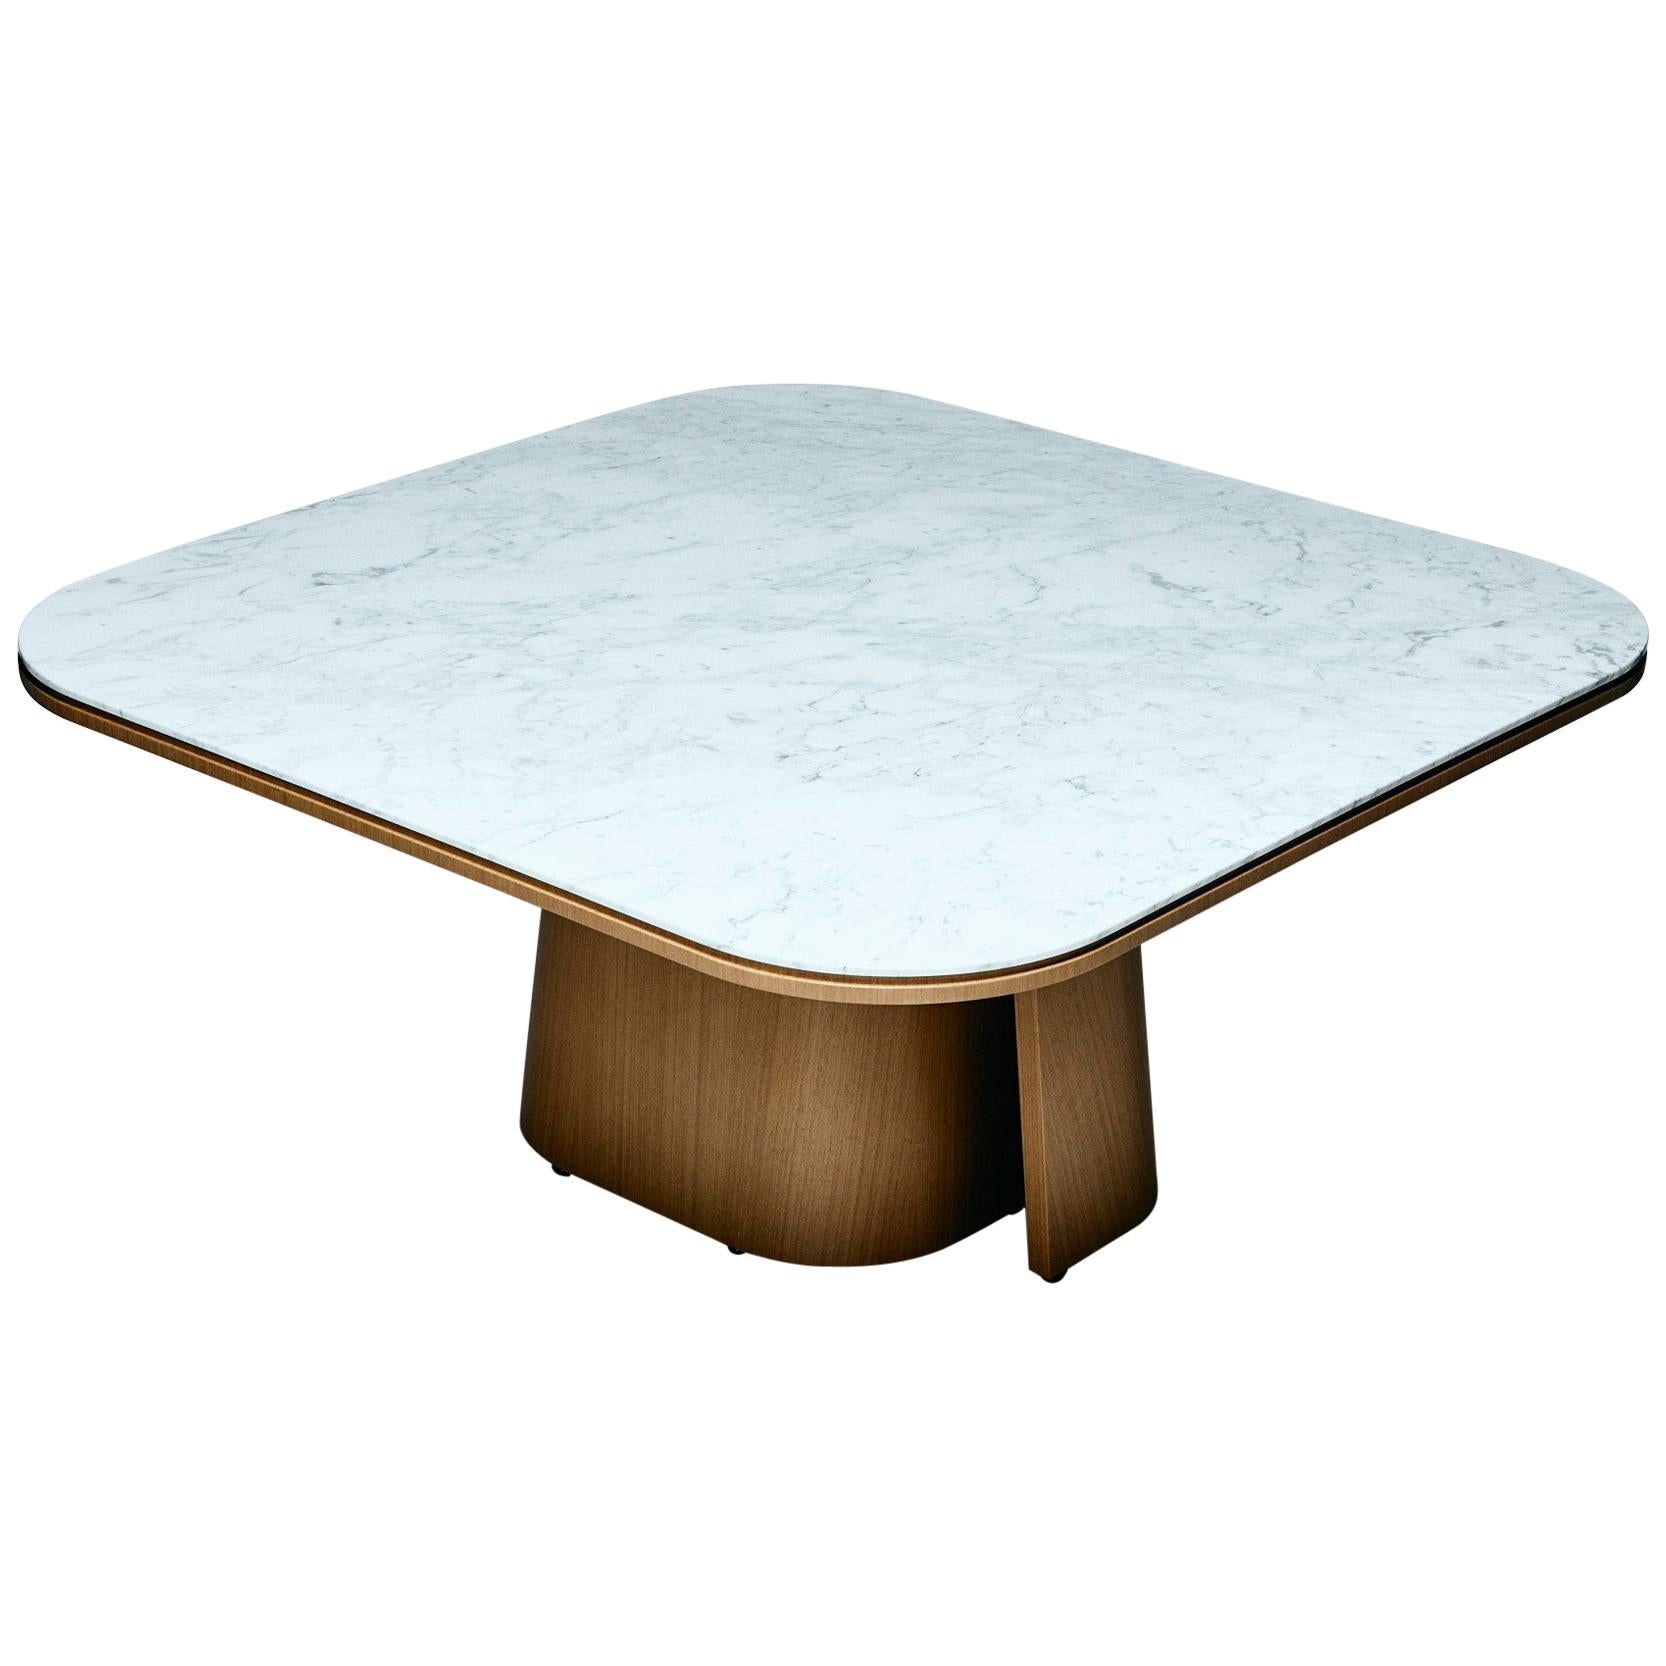 Dining Table, OOMA, by Reda Amalou Design, 2020, Carrara Marble, 140 cm